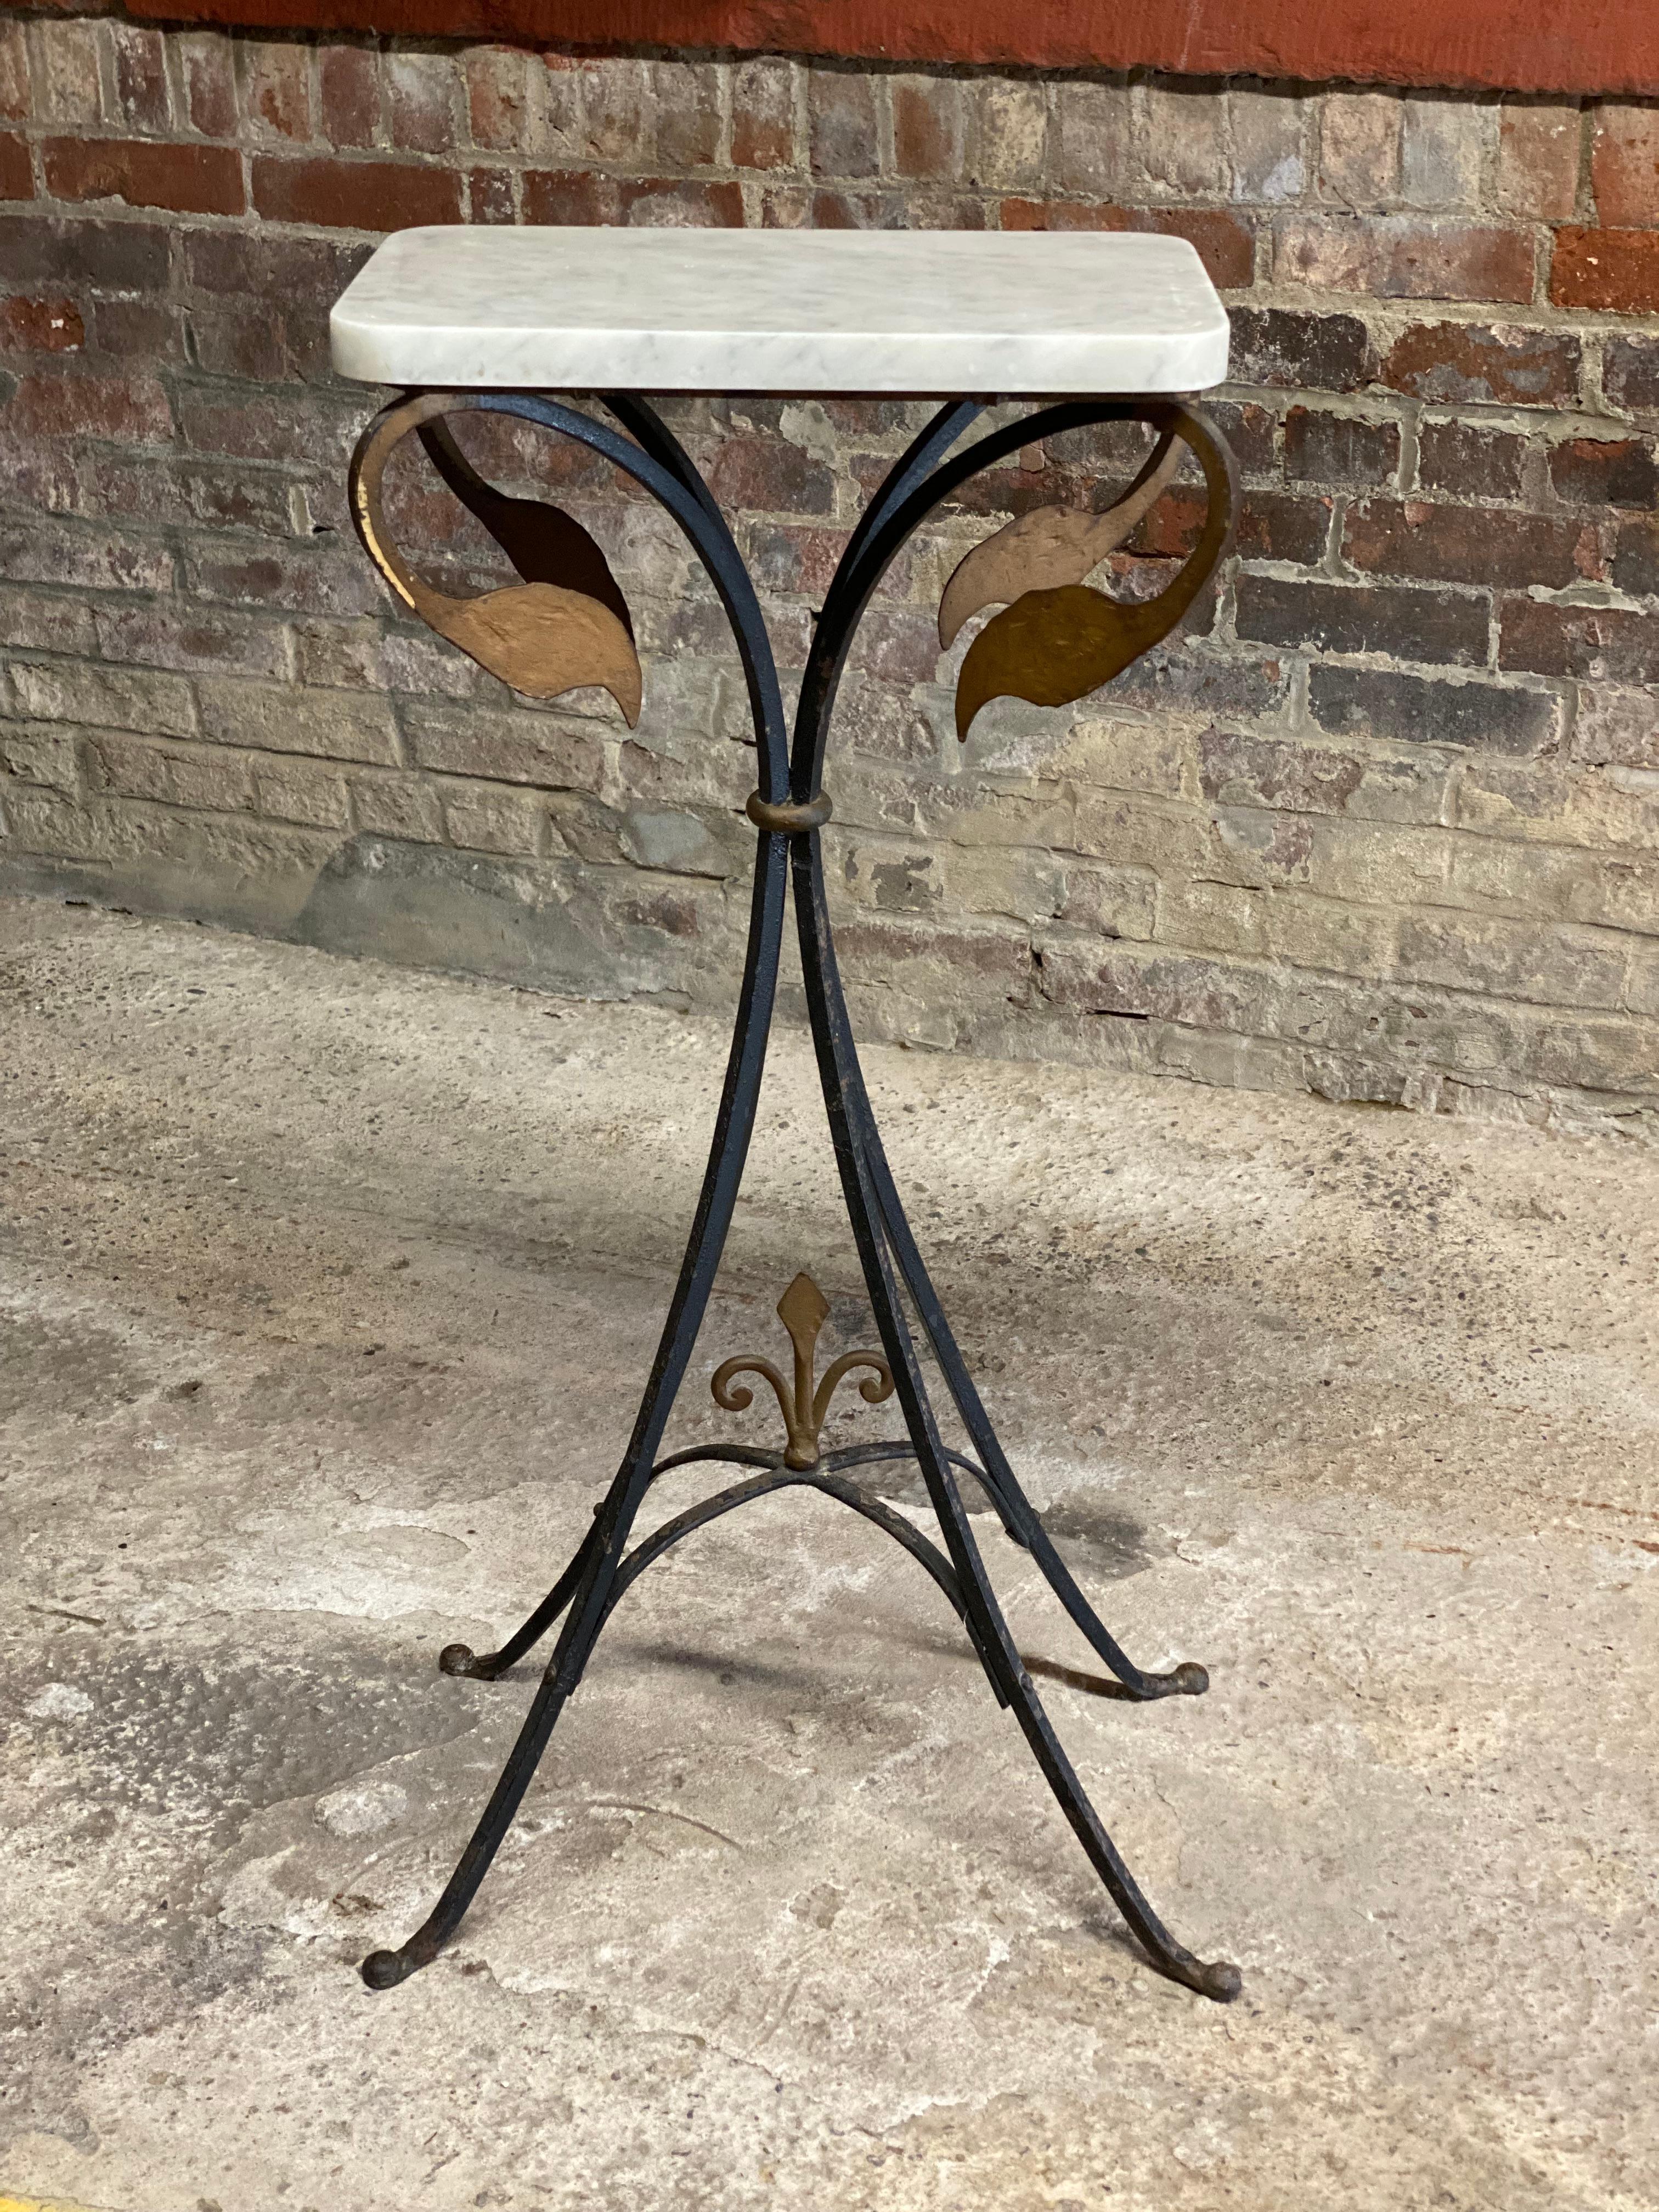 Beautiful French Art Deco wrought iron and white marble top stand. Four splayed and bundled iron rod legs with a fleur d'lis arched stretcher. The top of the stand has four languidly craning flamingo heads that support the polished white marble top.